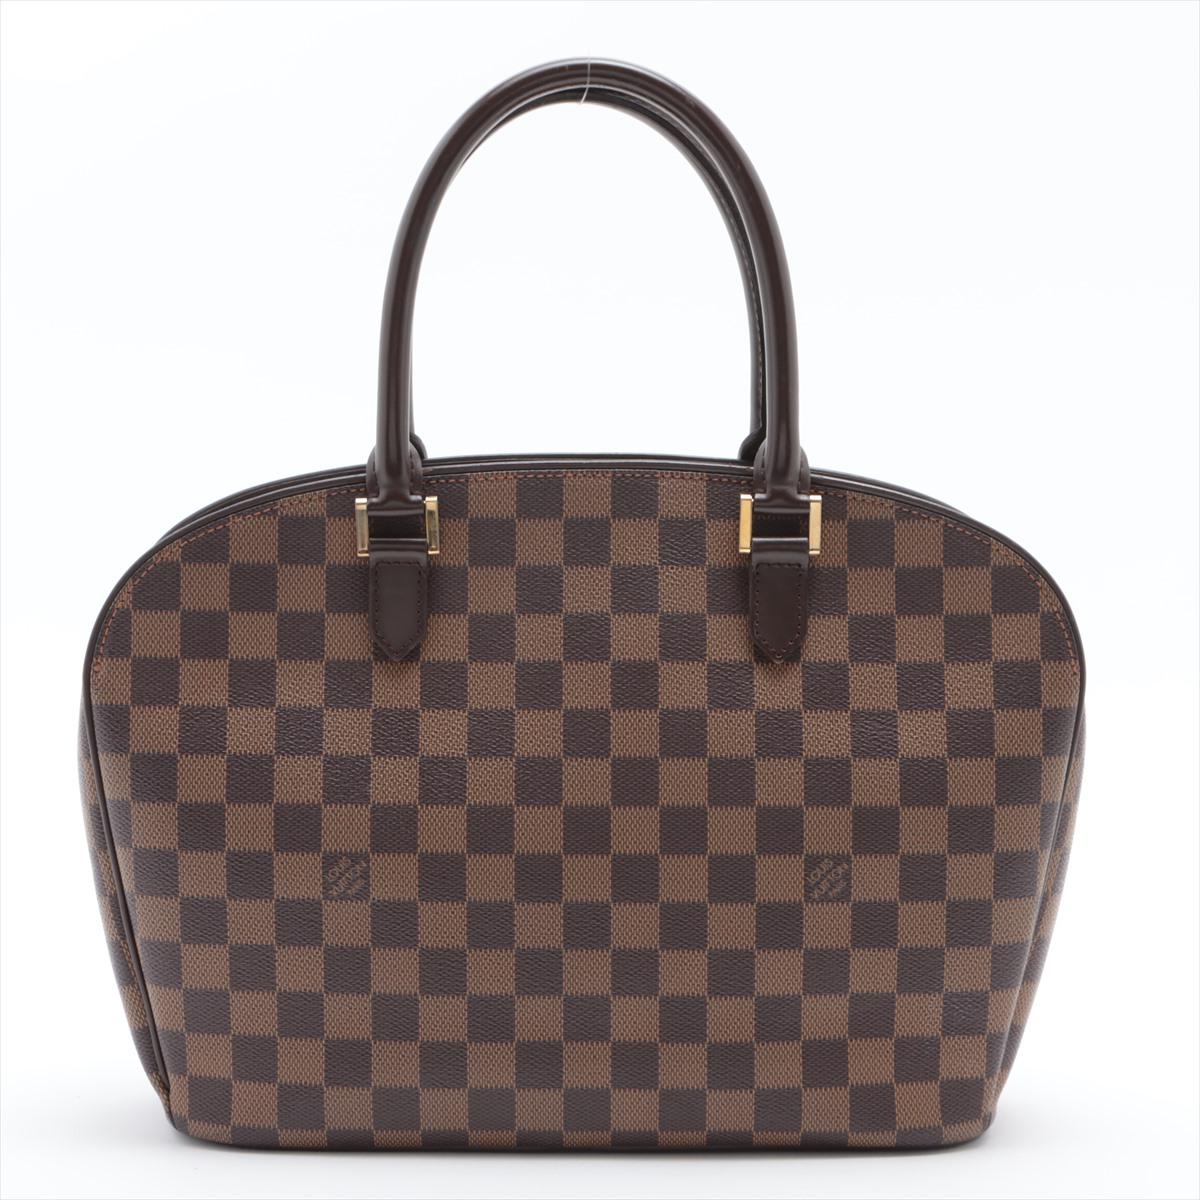 Brown Damier Ebene coated canvas Louis Vuitton Sarria Horizontal bag with dark brown leather trim, gold-tone hardware, rust red Alcantara microfiber lining, two interior slip pockets, slip pocket on front exterior, dual rolled top handles, and zip